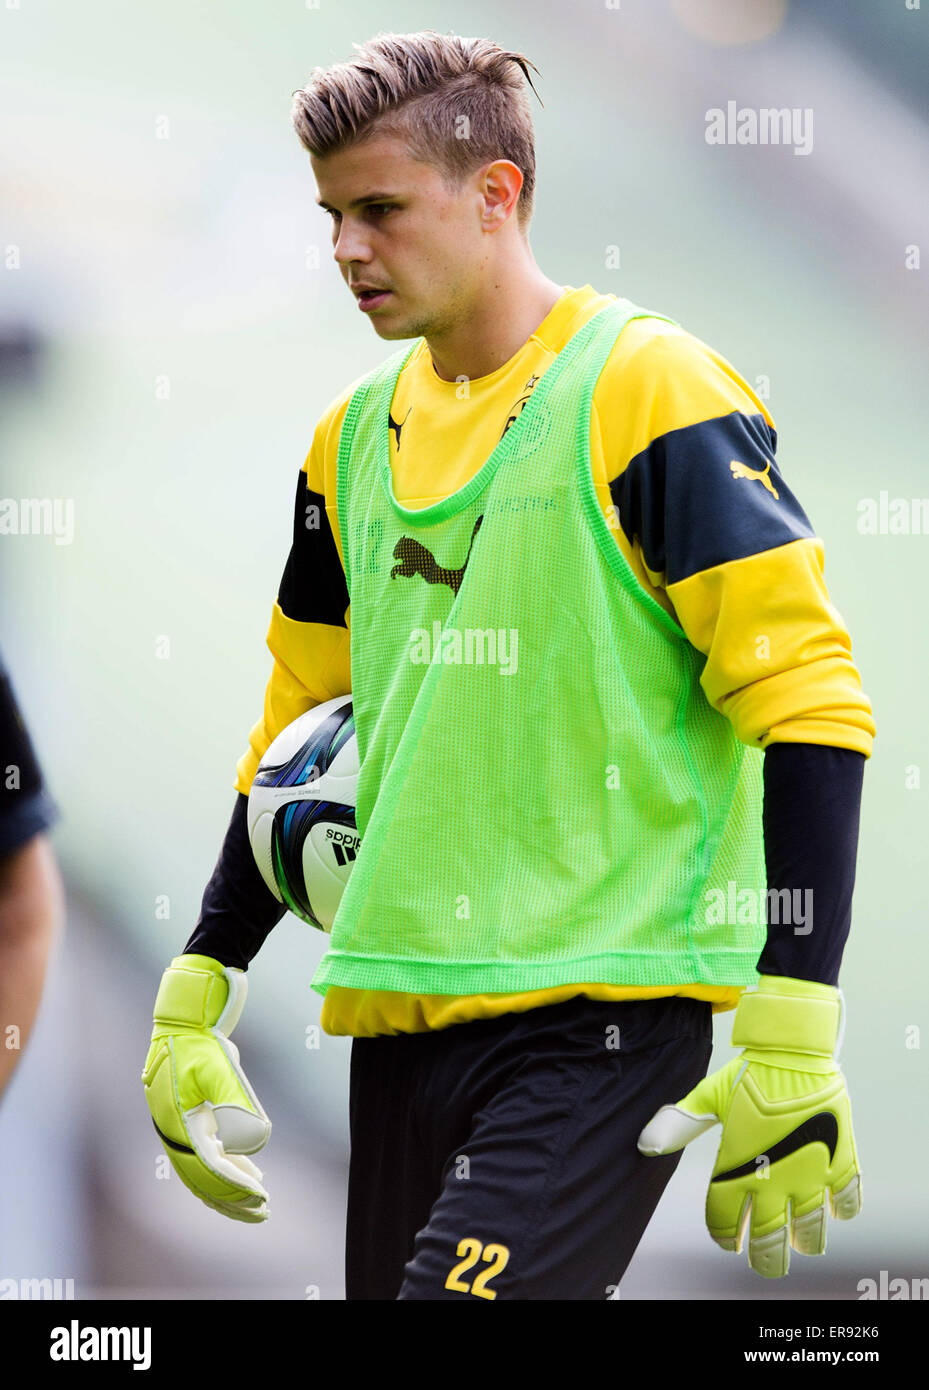 Berlin, Germany. 29th May, 2015. Dortmund's goalkeeper Mitchell Langerak pictured during a training session at the Olympic Stadium in Berlin, Germany, 29 May 2015. The cup final between Borussia Dortmund und VfL Wolfsburg will be played on 30 May. Photo: LUKAS SCHULZE/dpa/Alamy Live News Stock Photo